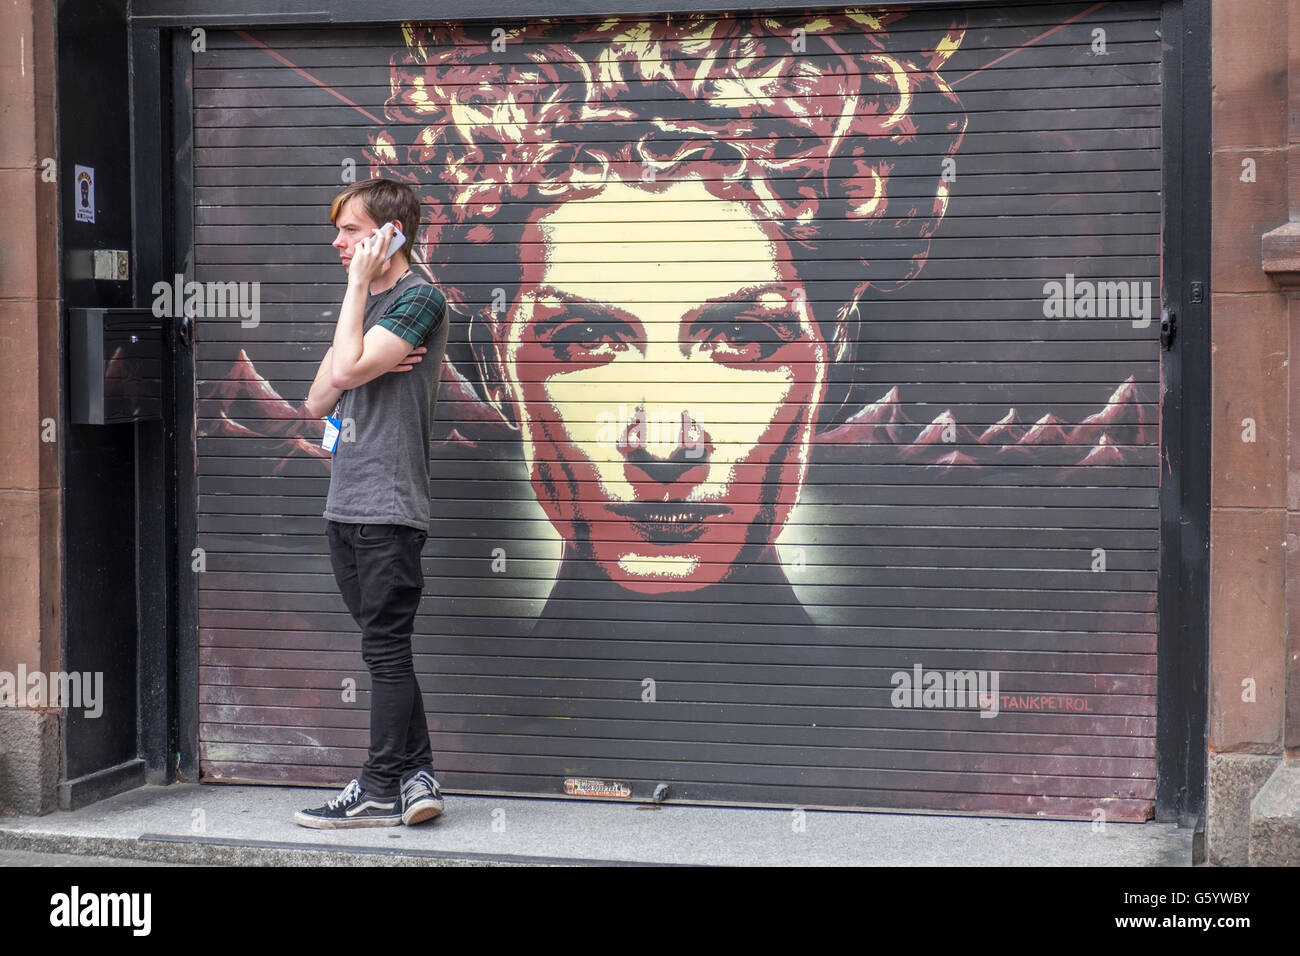 A man stood in a doorway whilst speaking on a mobile phone with a wall art painting of a lady behind him. Stock Photo